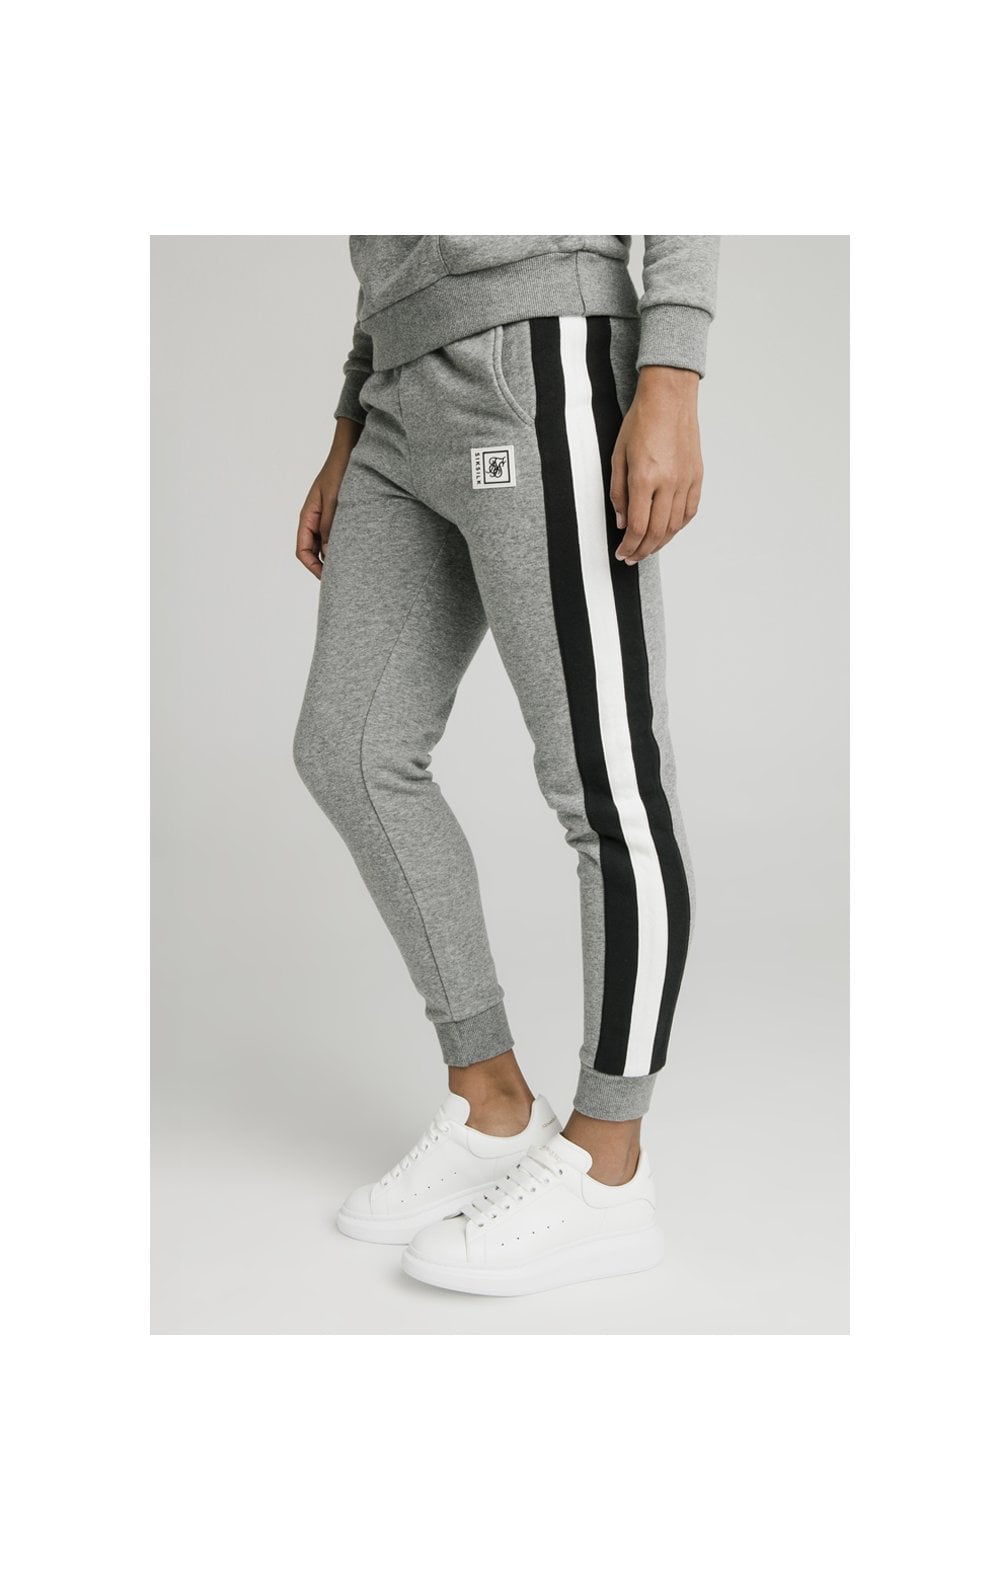 SikSilk Luxe Track Pants - Grey Marl (3)